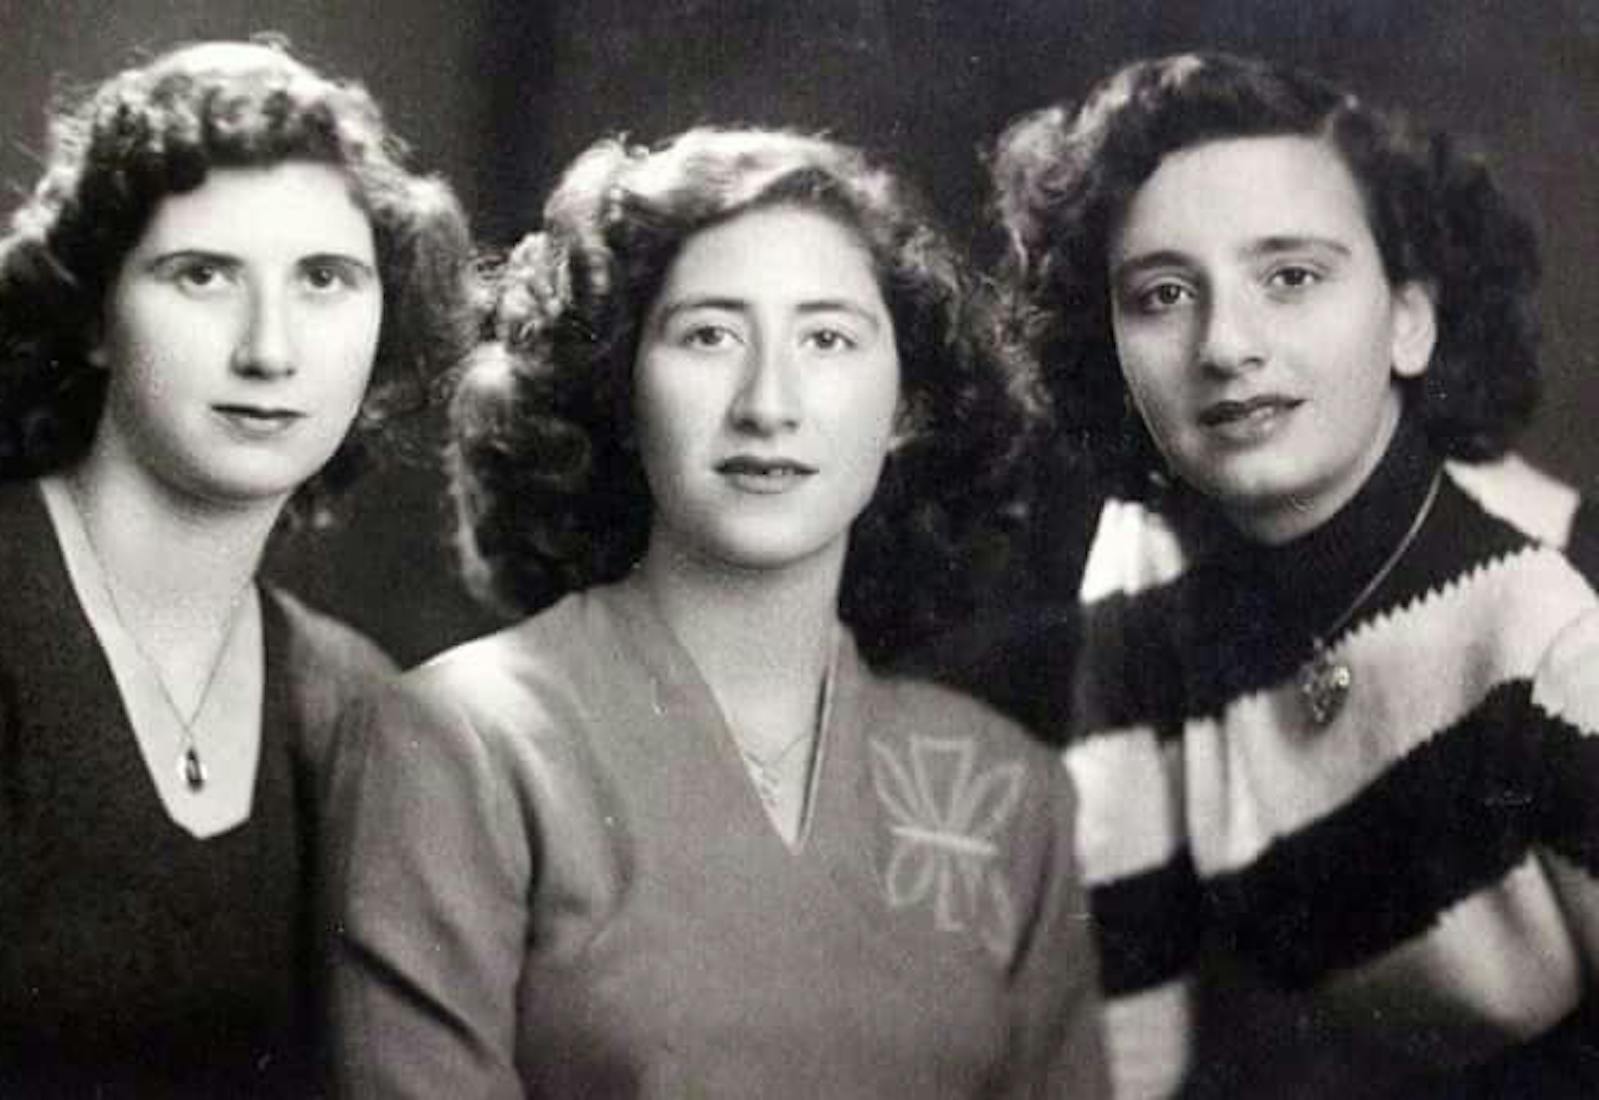 From left to right: Marcel, Nur (Marcel's sister) and Hana (Marcel's sister-in-law) - Baghdad, 1947